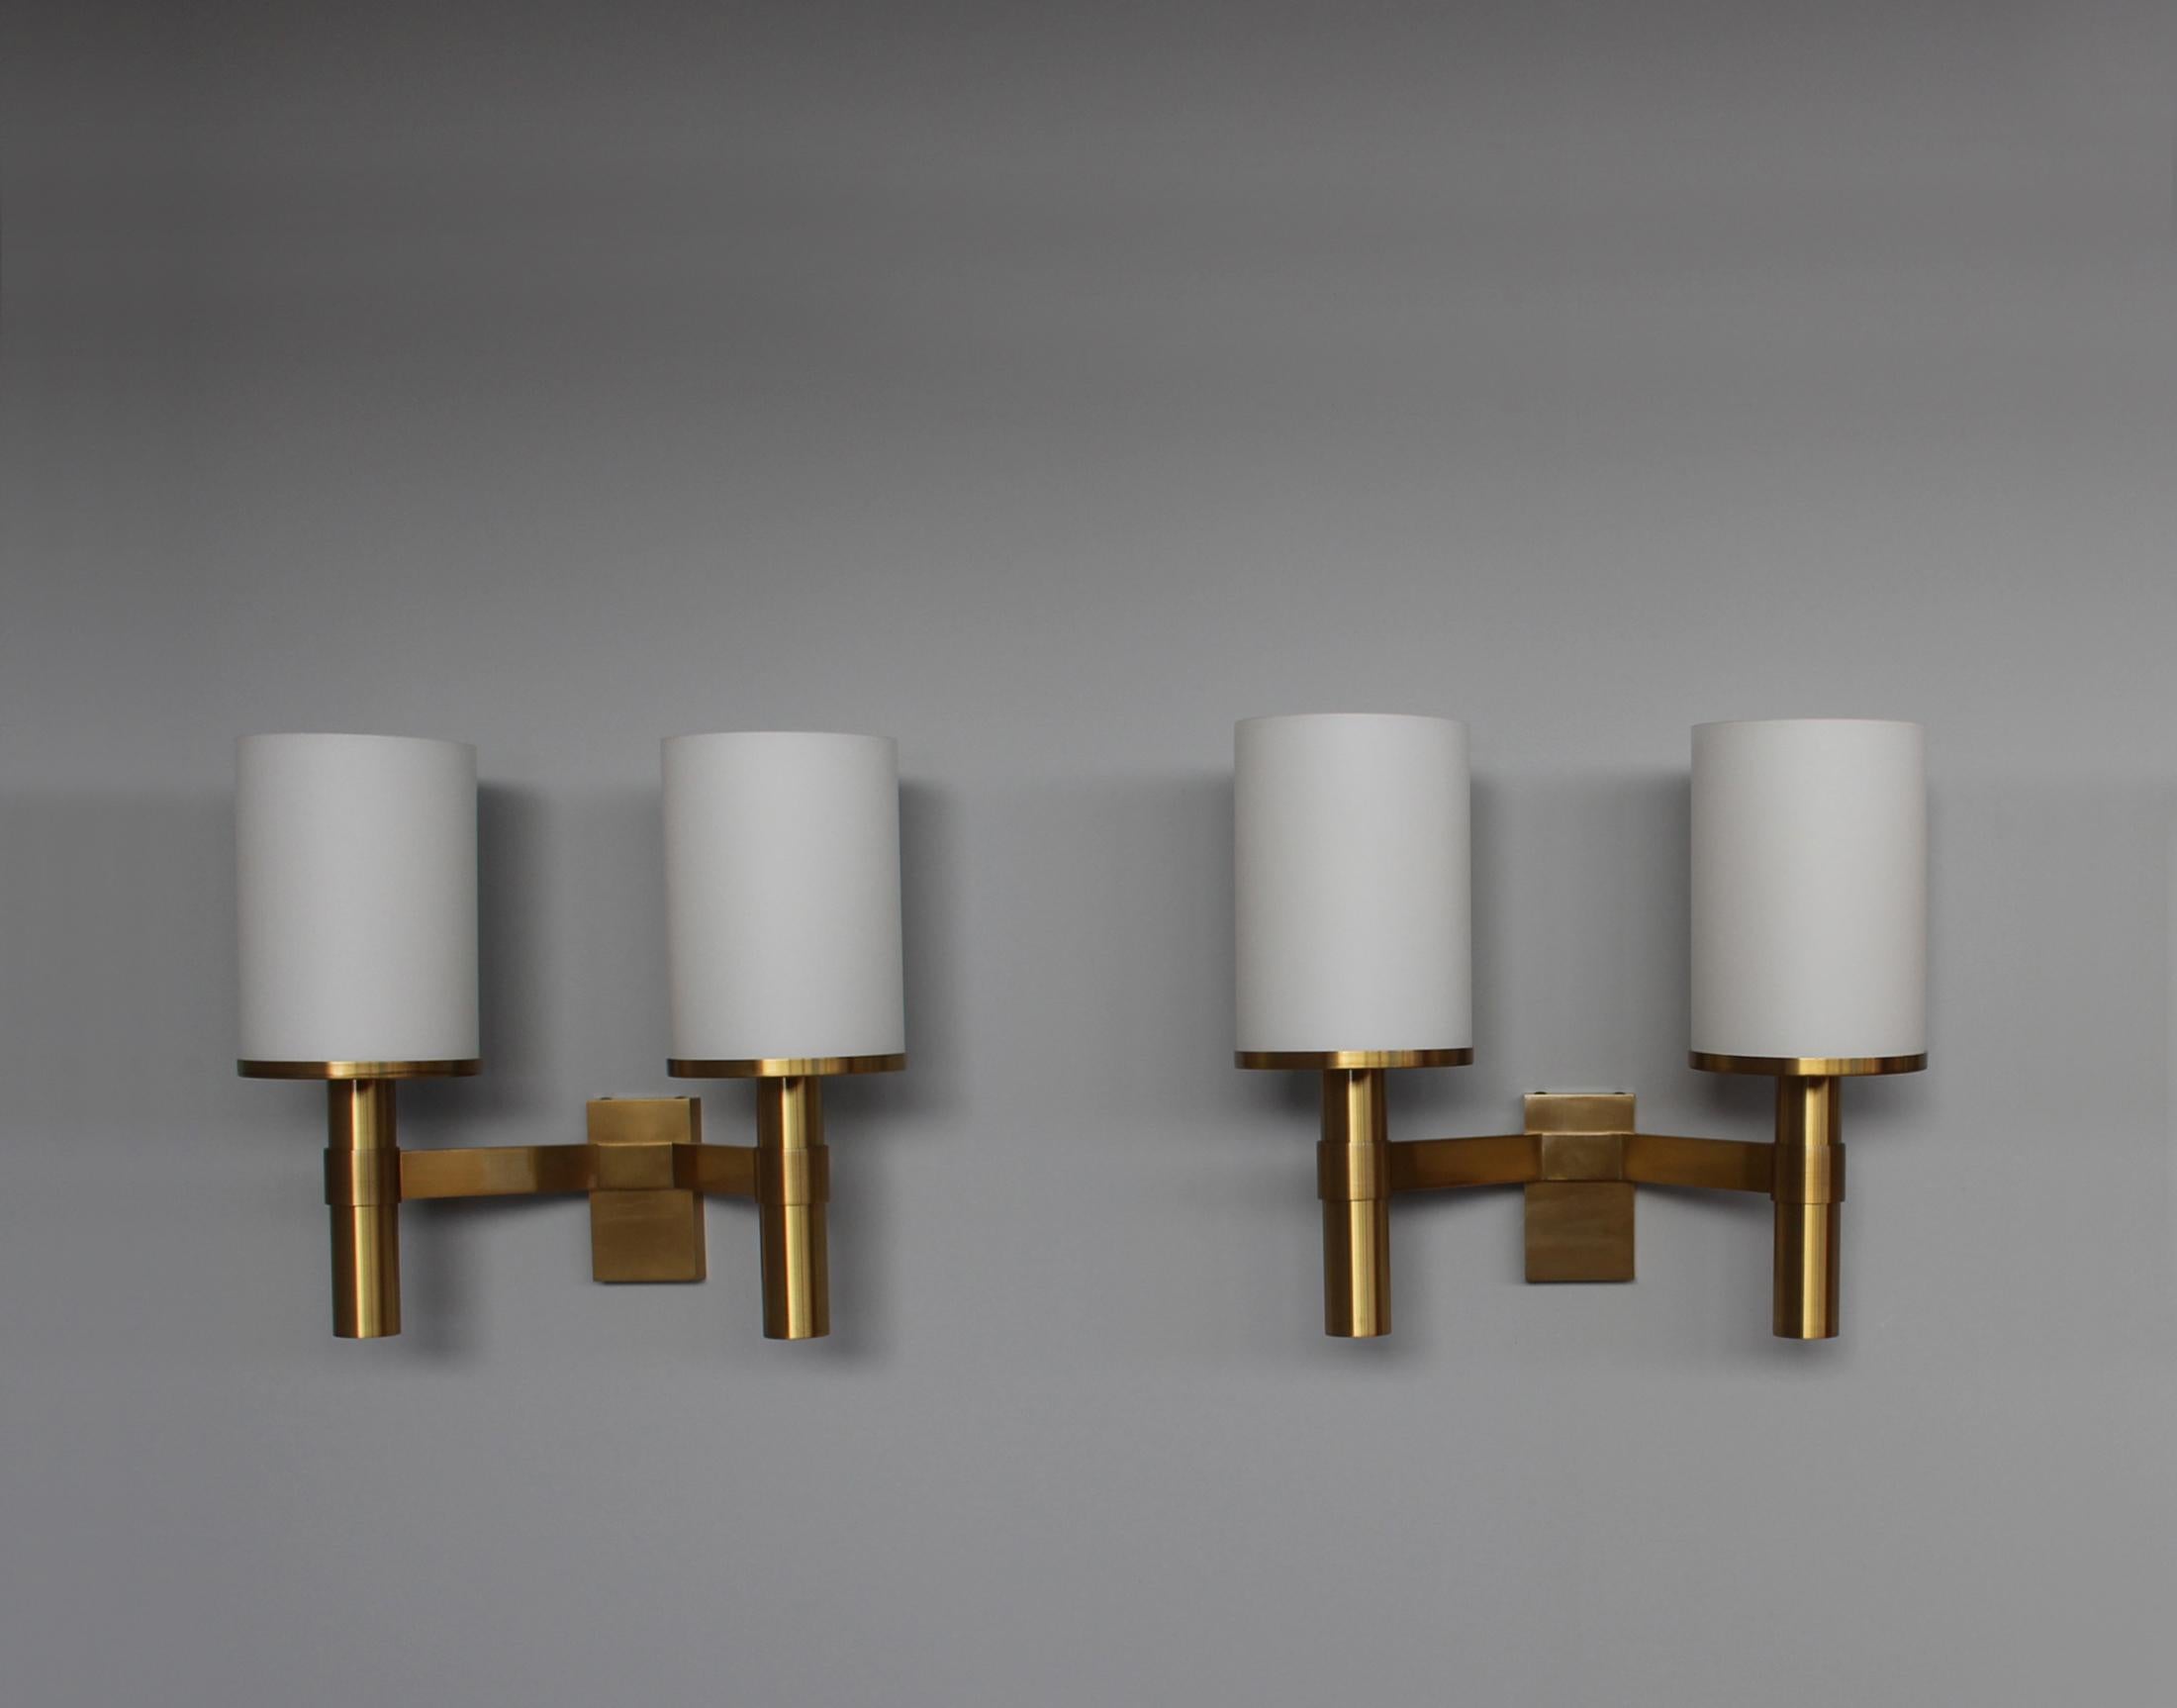 Atelier Perzel - Two fine French Art Deco double arms wall lights with a gilded polished bronze arm and cylindrical frosted and enameled glass shades. Signed.
Price is per sconce.